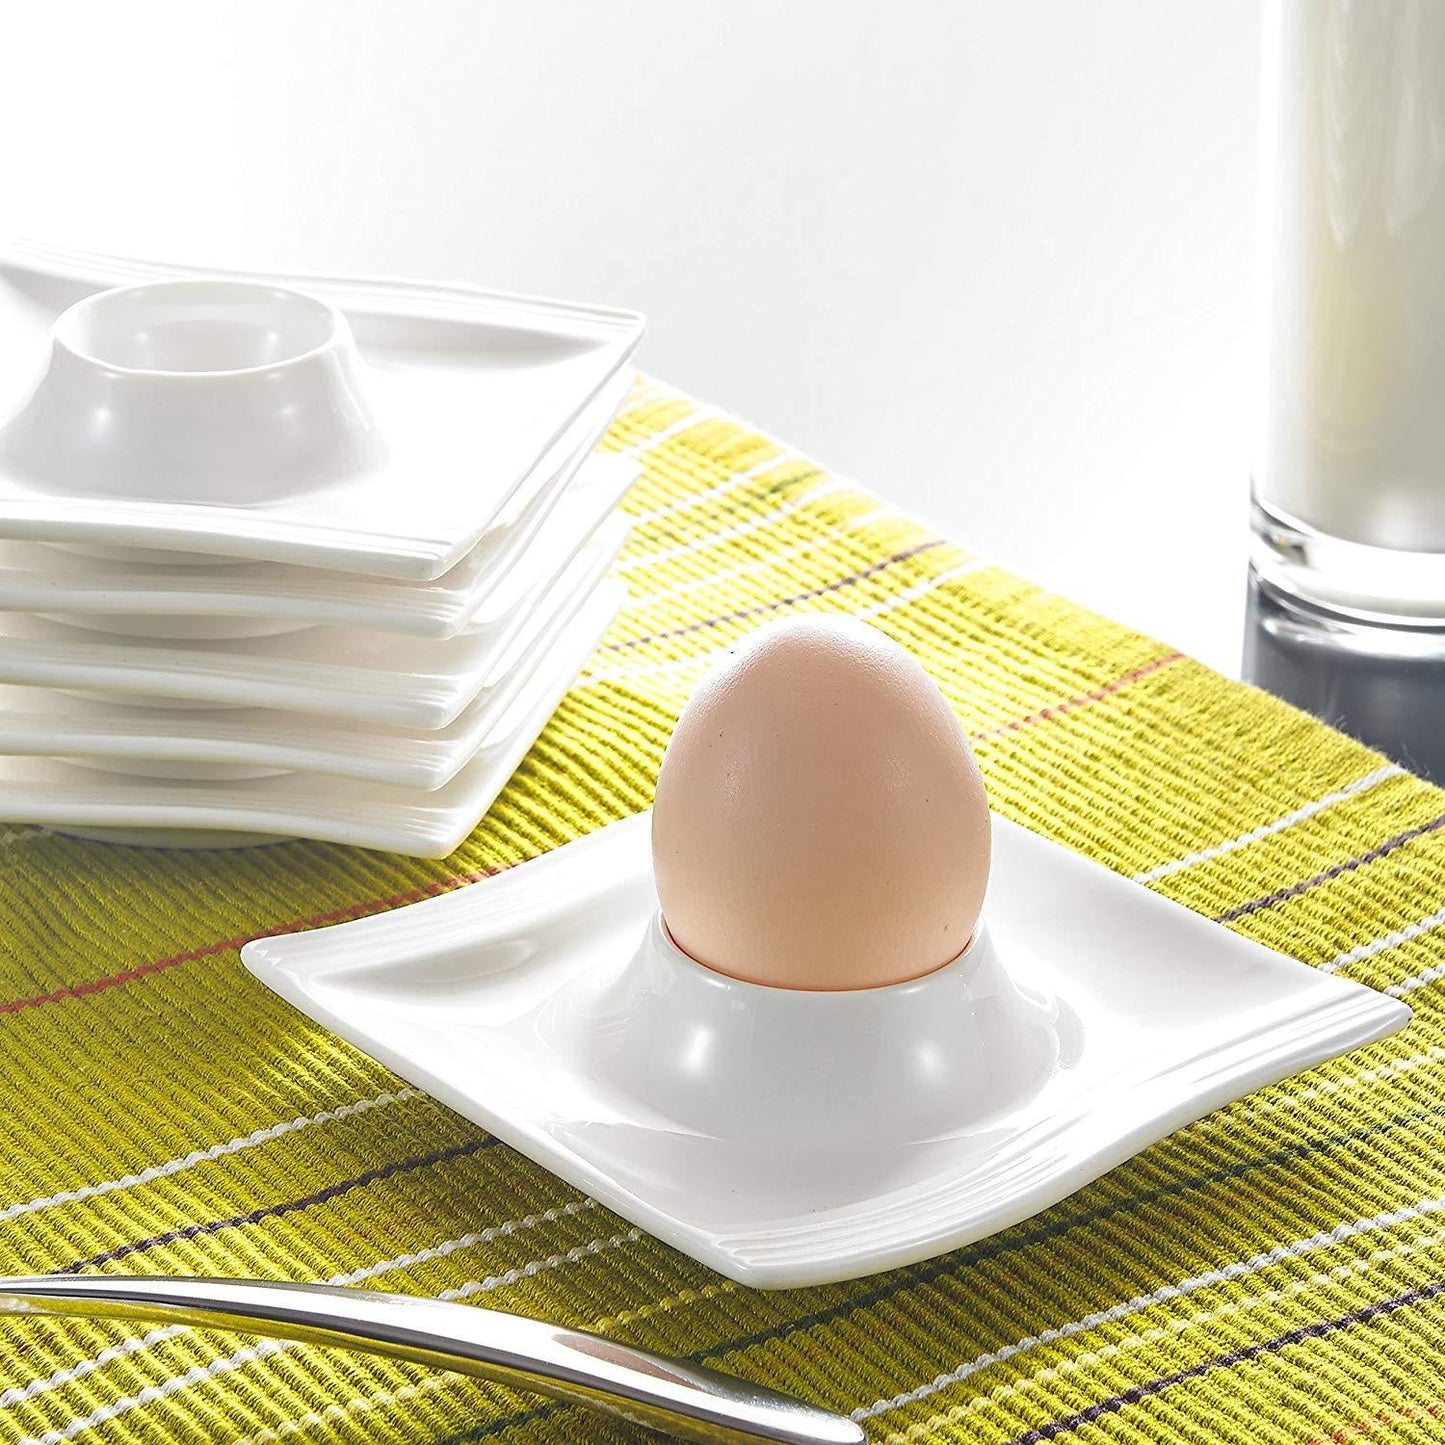 Flora 6-Piece Series White Porcelain Egg Stand Holder - Nordic Side - 115, 25, Breakfast, cm, Cups, Egg, Flora, Holder, Kitchen, Malacasa, Piece, Plates, Porcelain, Series, Stand, Tools, Whit